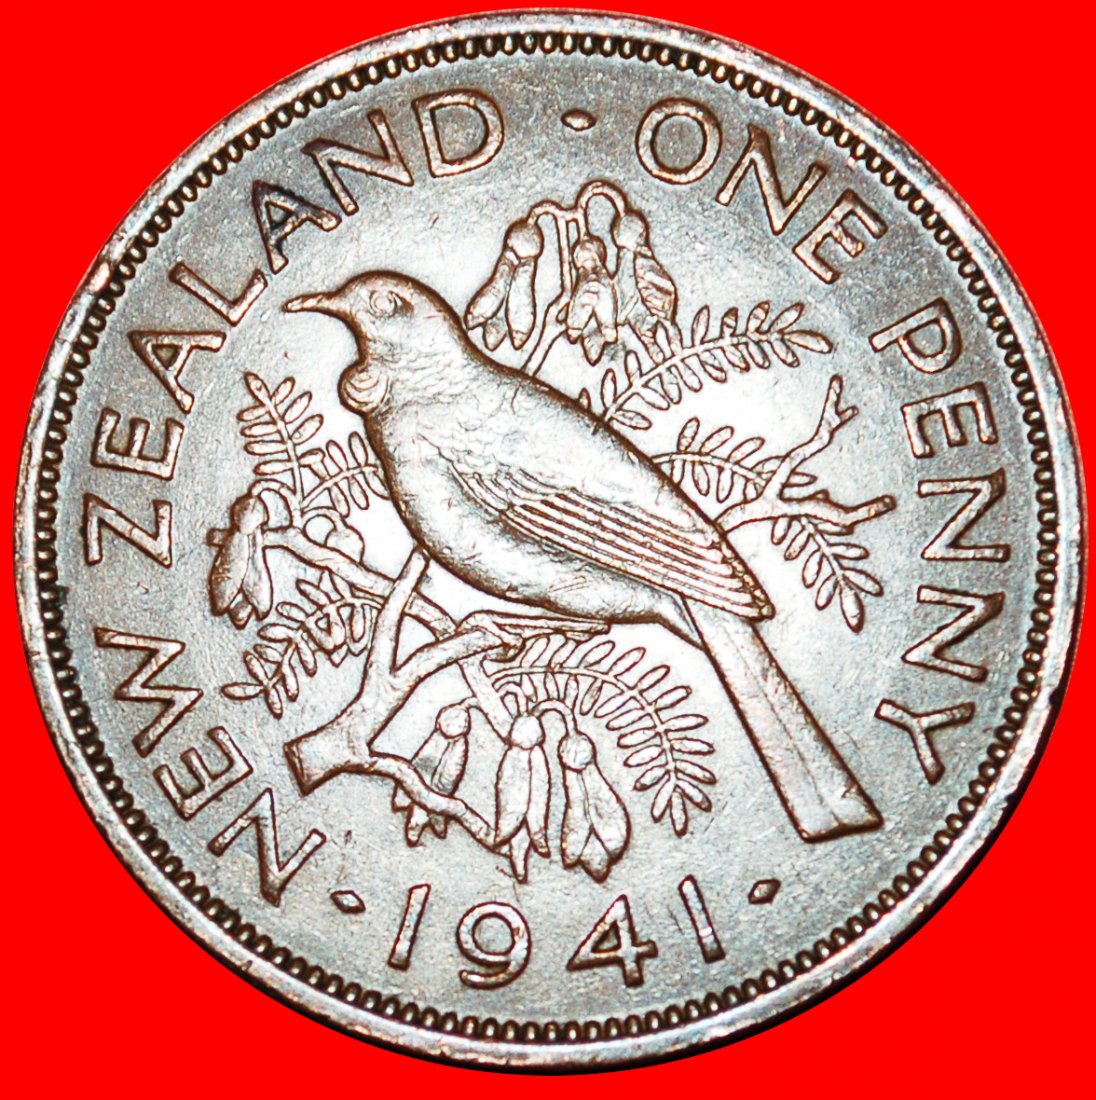  + BIRD AND FLOWERS: NEW ZEALAND ★ PENNY 1941! WAR ISSUE (1939-1945)! LOW START ★ NO RESERVE!   